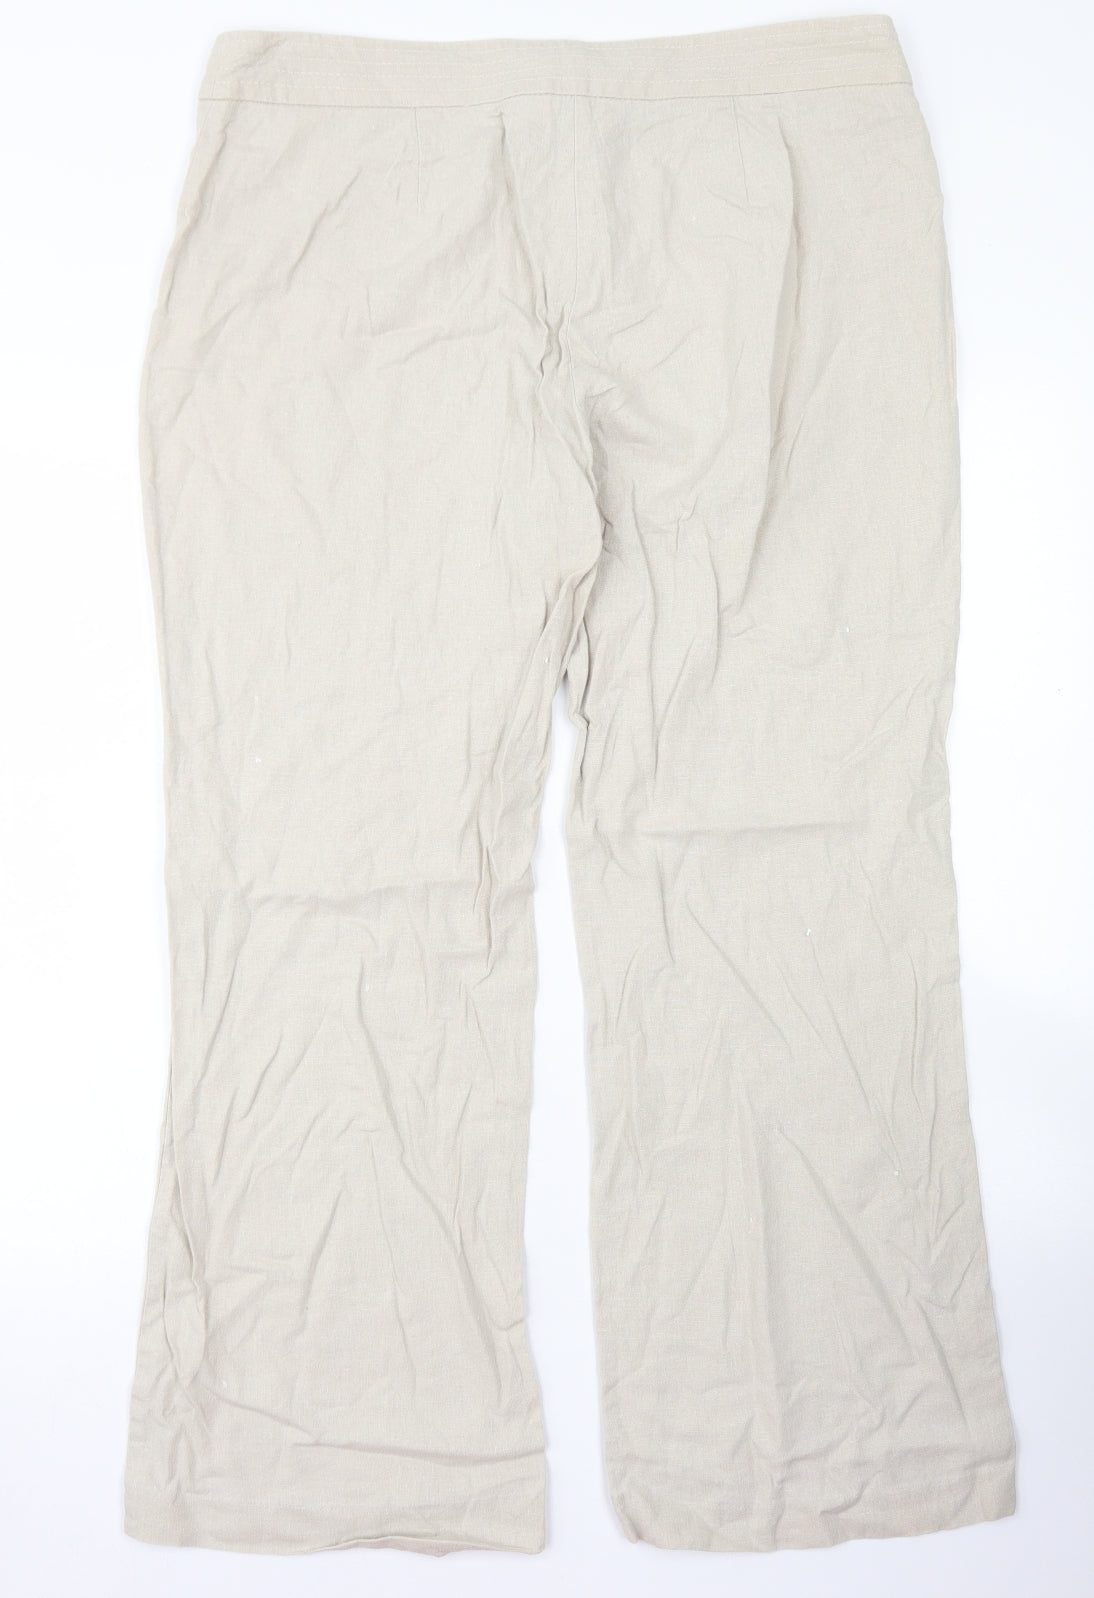 New M&S Womens Marks and Spencer Grey Peg Linen Trousers Size 16 14 12 10 |  eBay